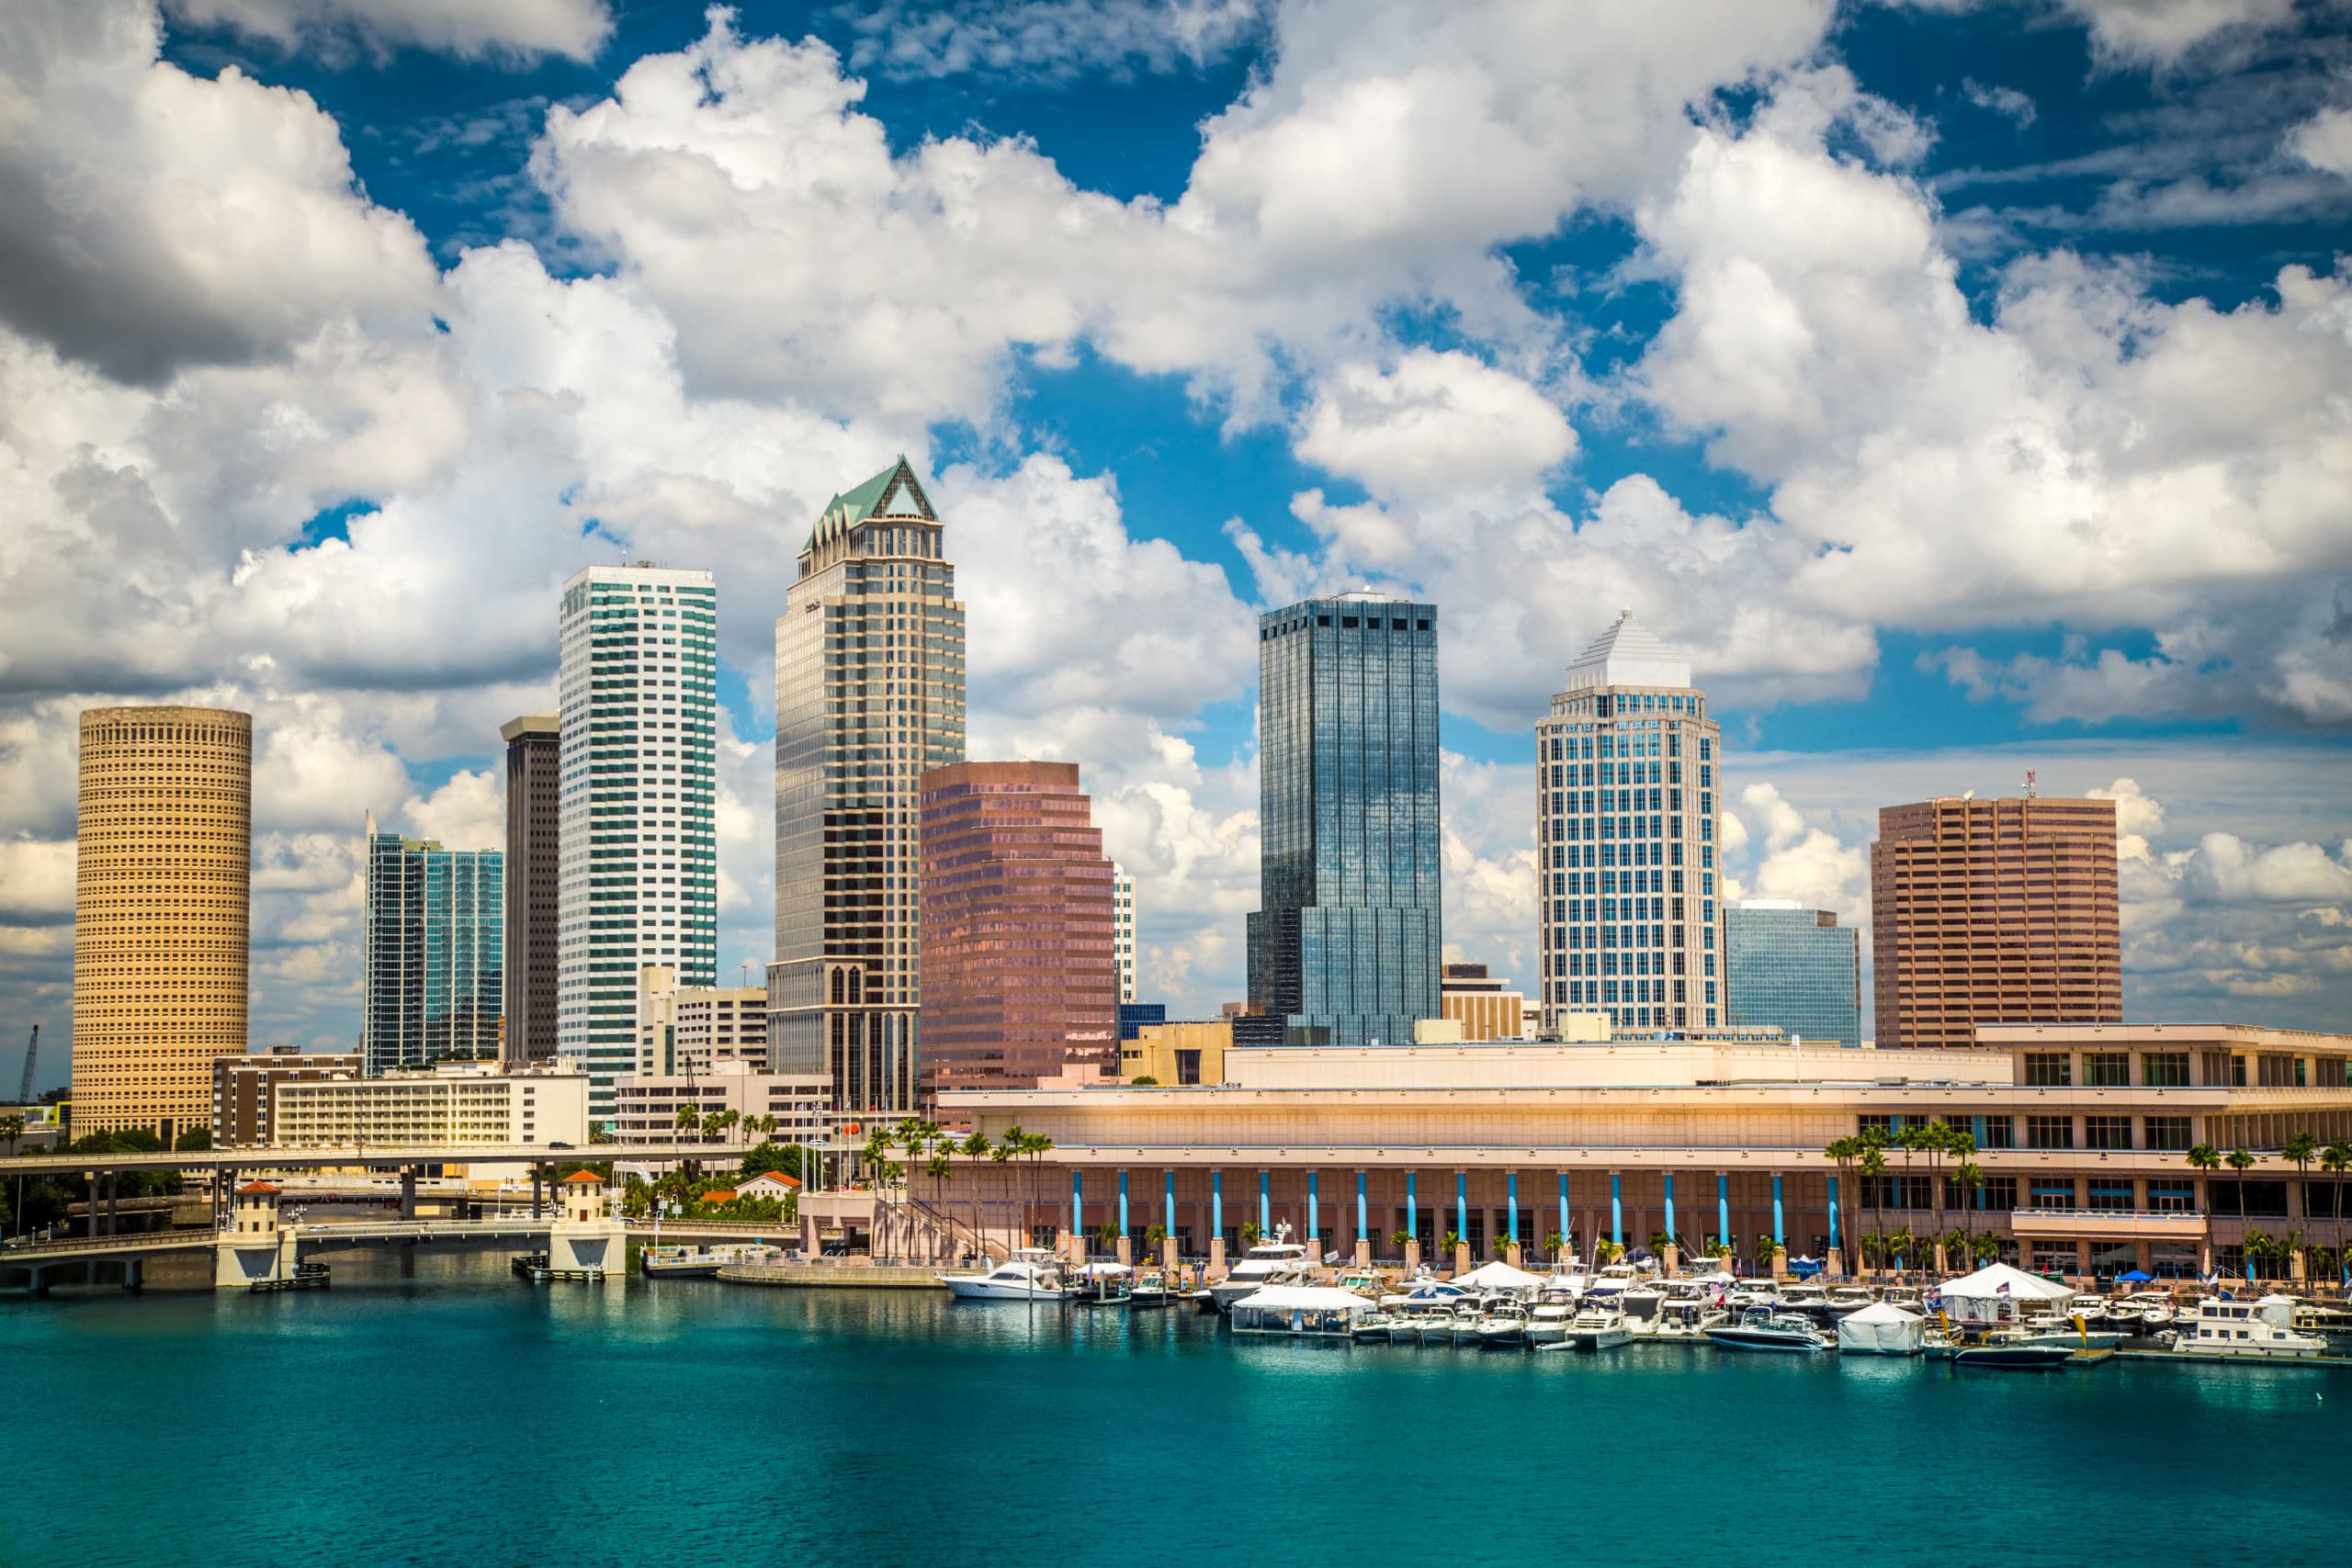 City view from the water of Tampa Florida